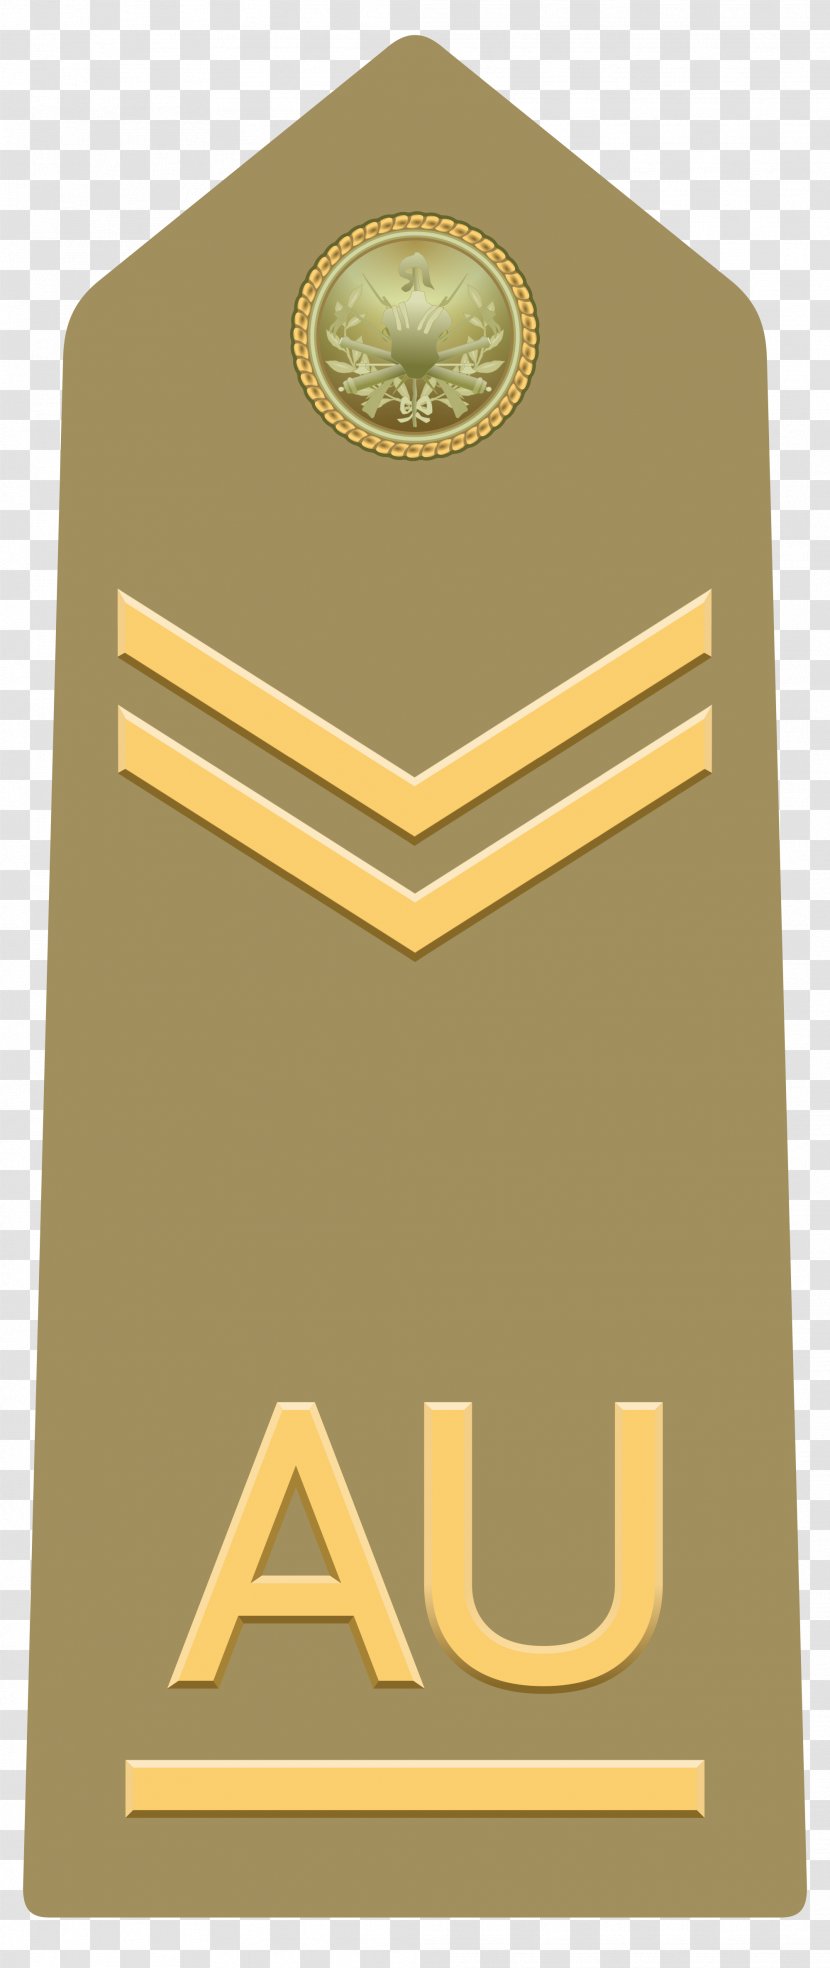 Officer Cadet Army Caporal Maggiore Capo Scelto Military Rank Italian - Tanks In The Transparent PNG